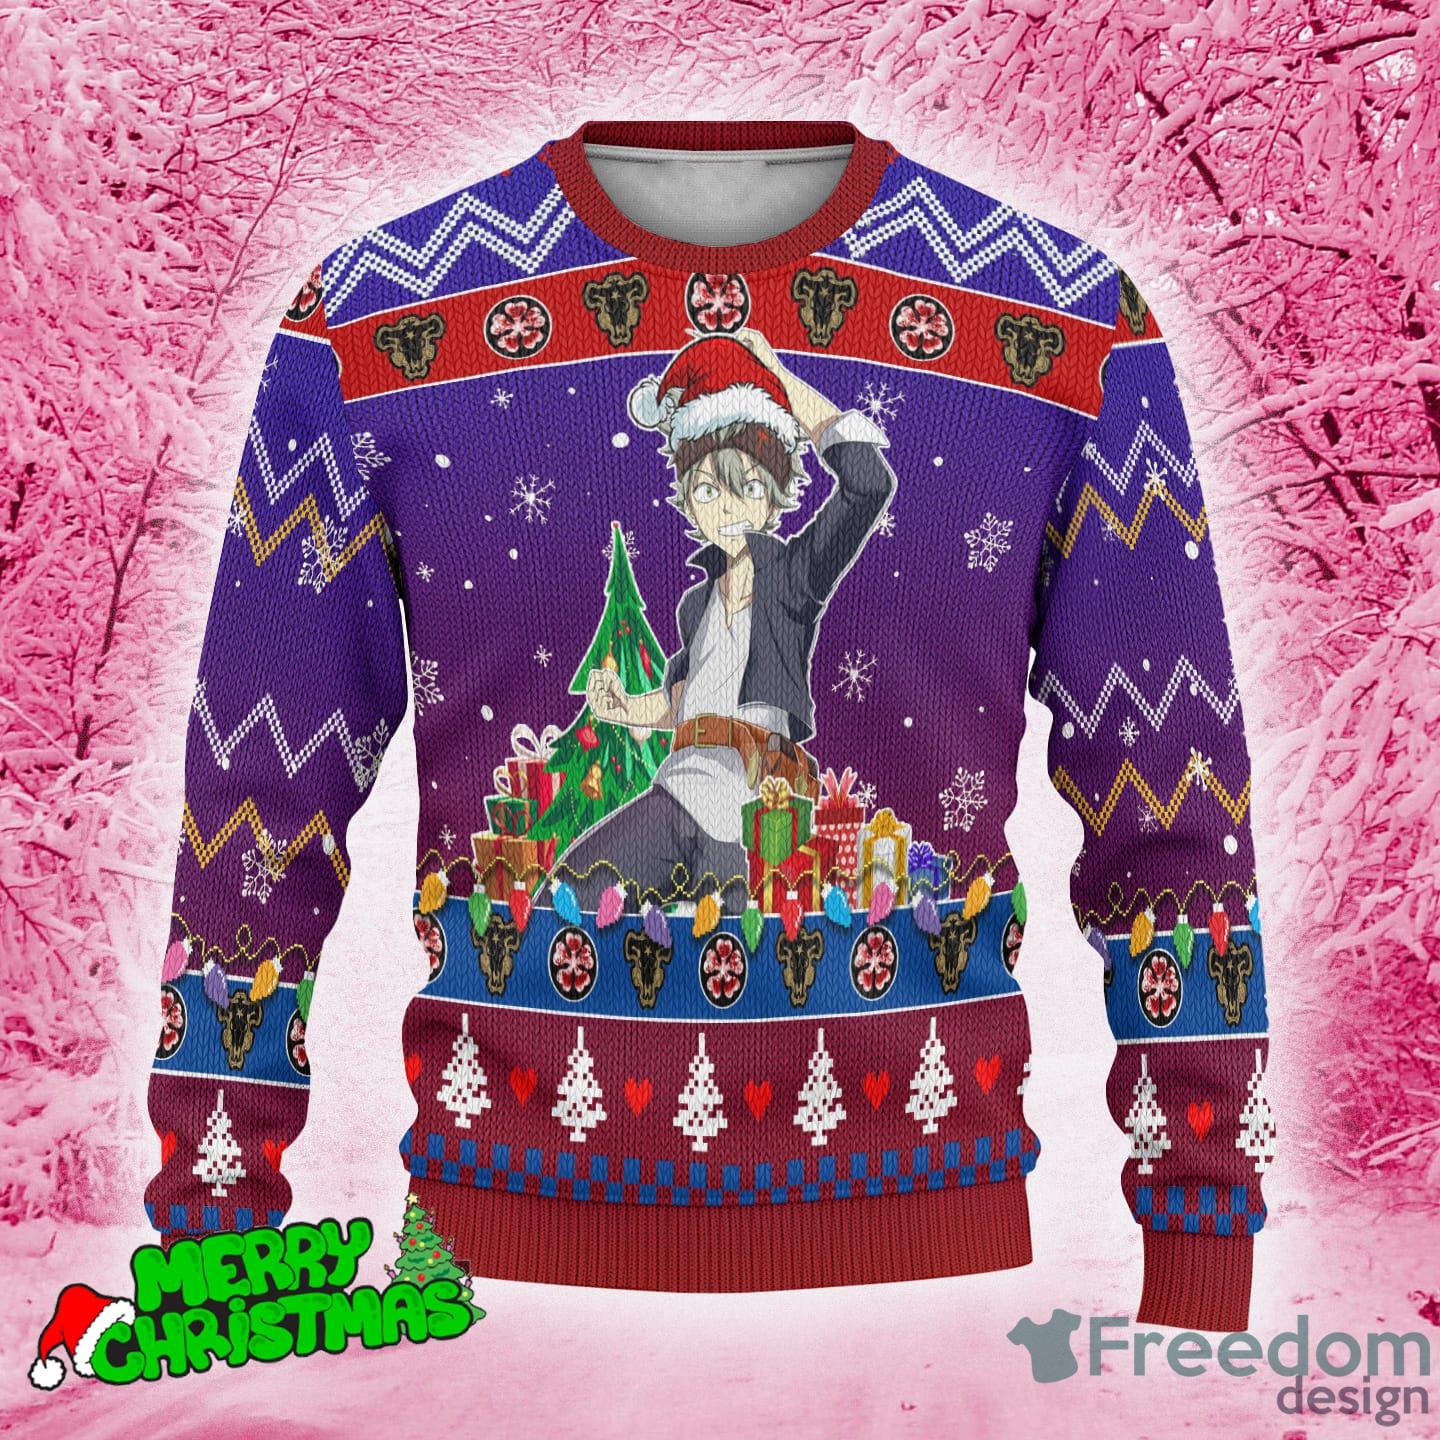 Asta Uniform Ugly Christmas Sweater Black Clover Gift Anime For Men And  Women - Shibtee Clothing